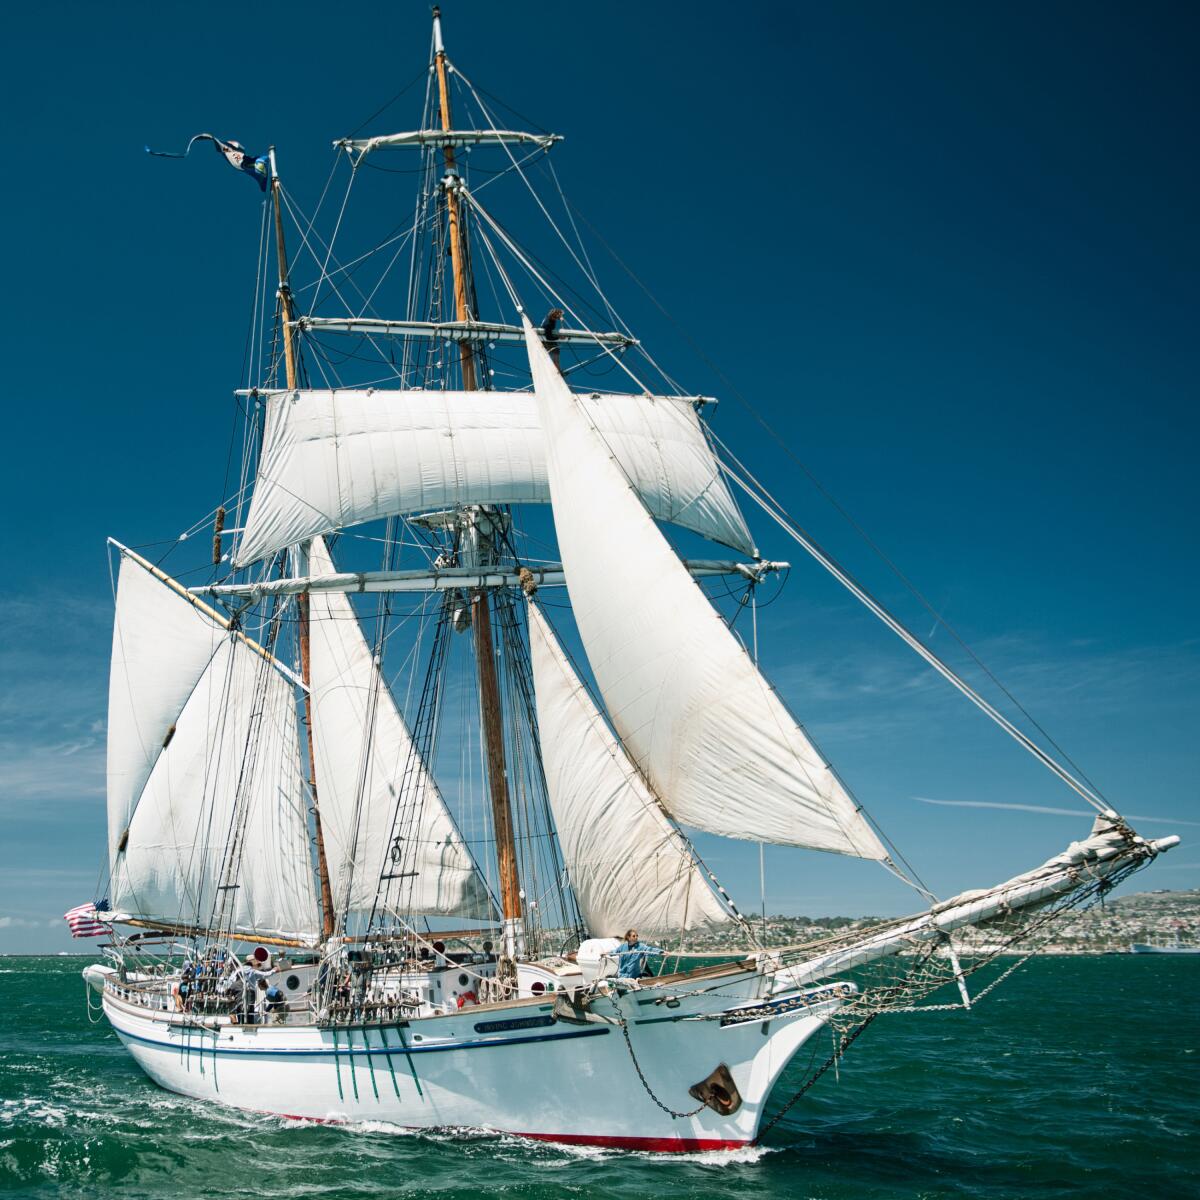 A tall ship with sails up